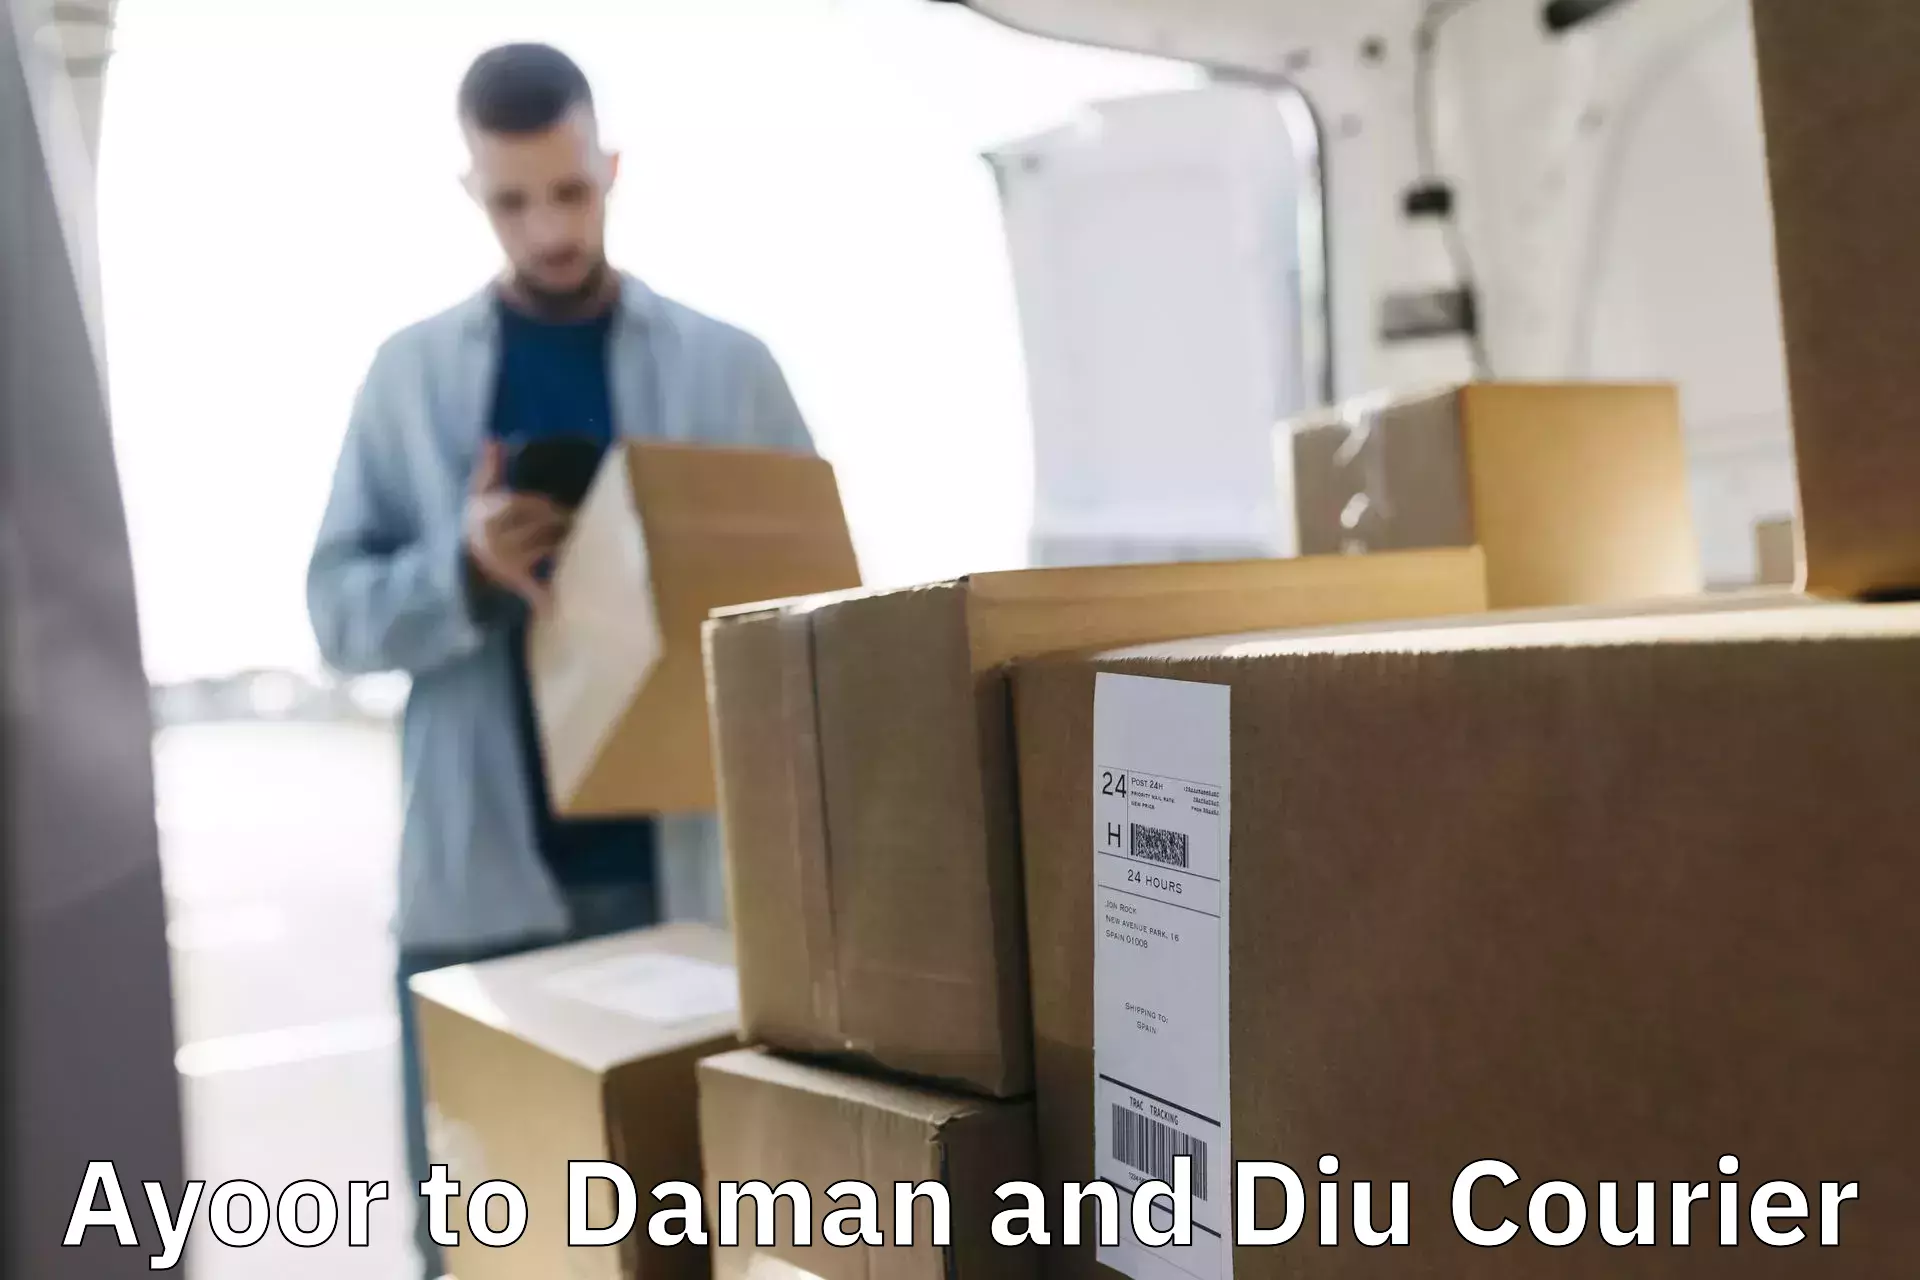 Local courier options Ayoor to Diu